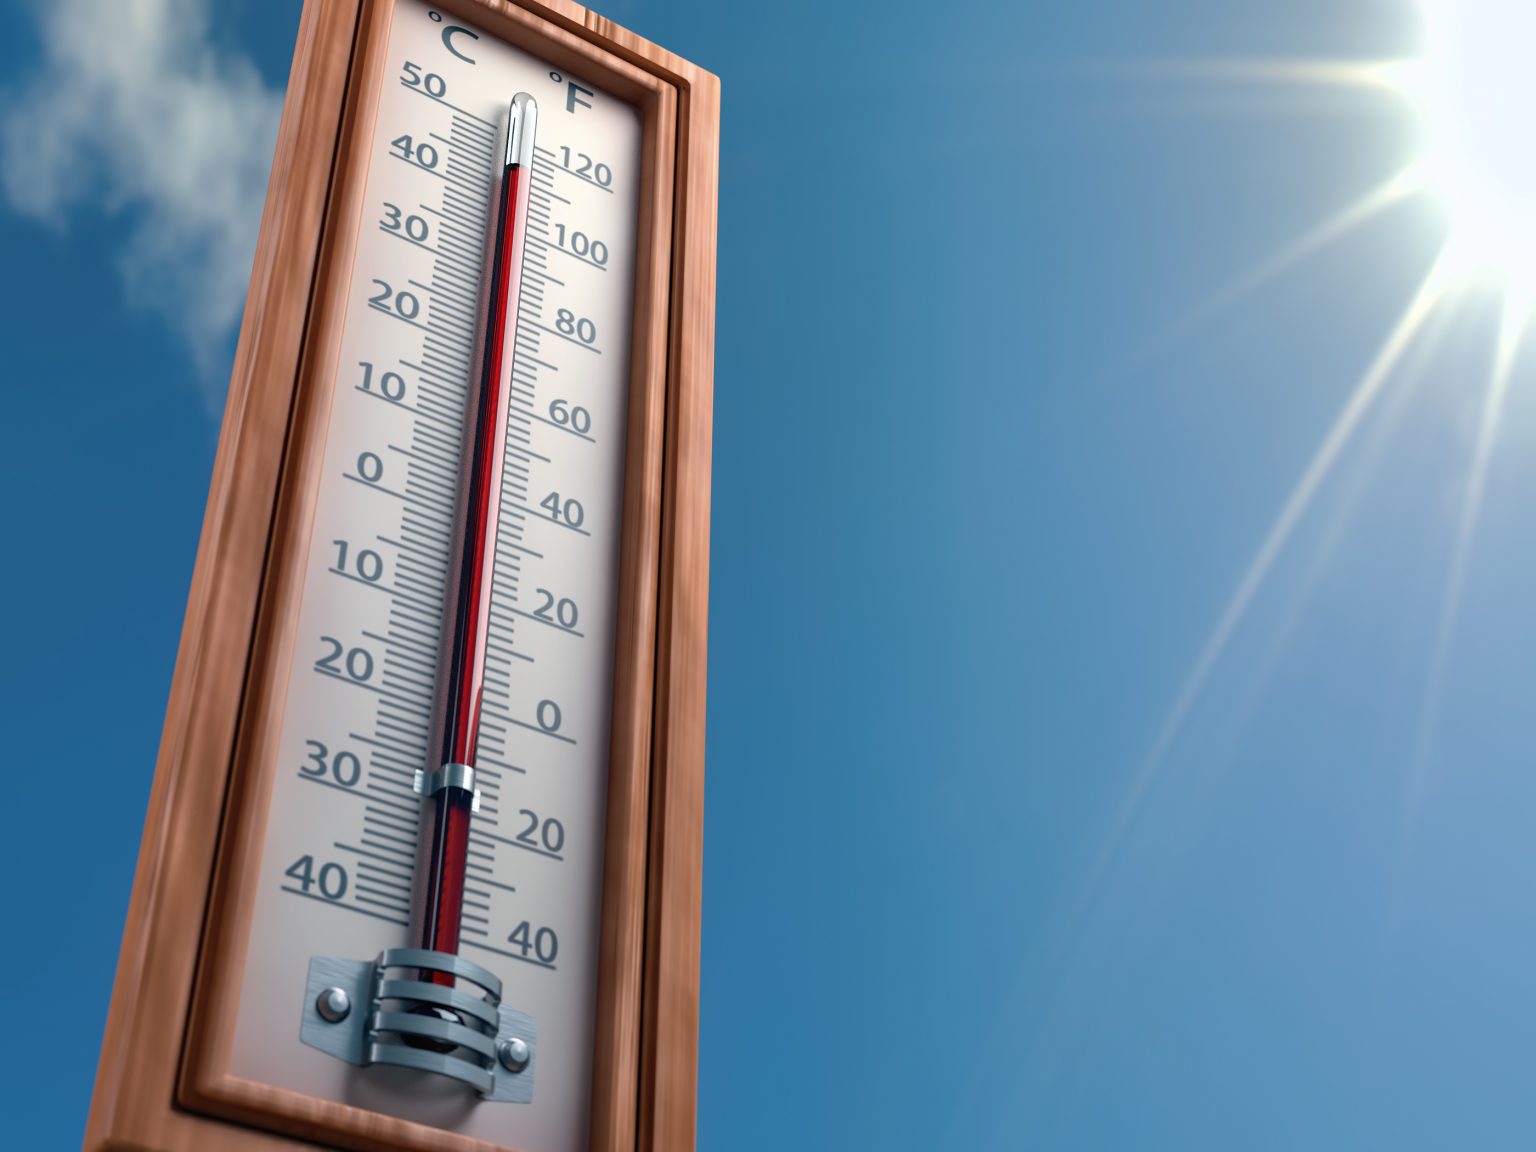 Outdoor thermometer indicating extreme high temperature